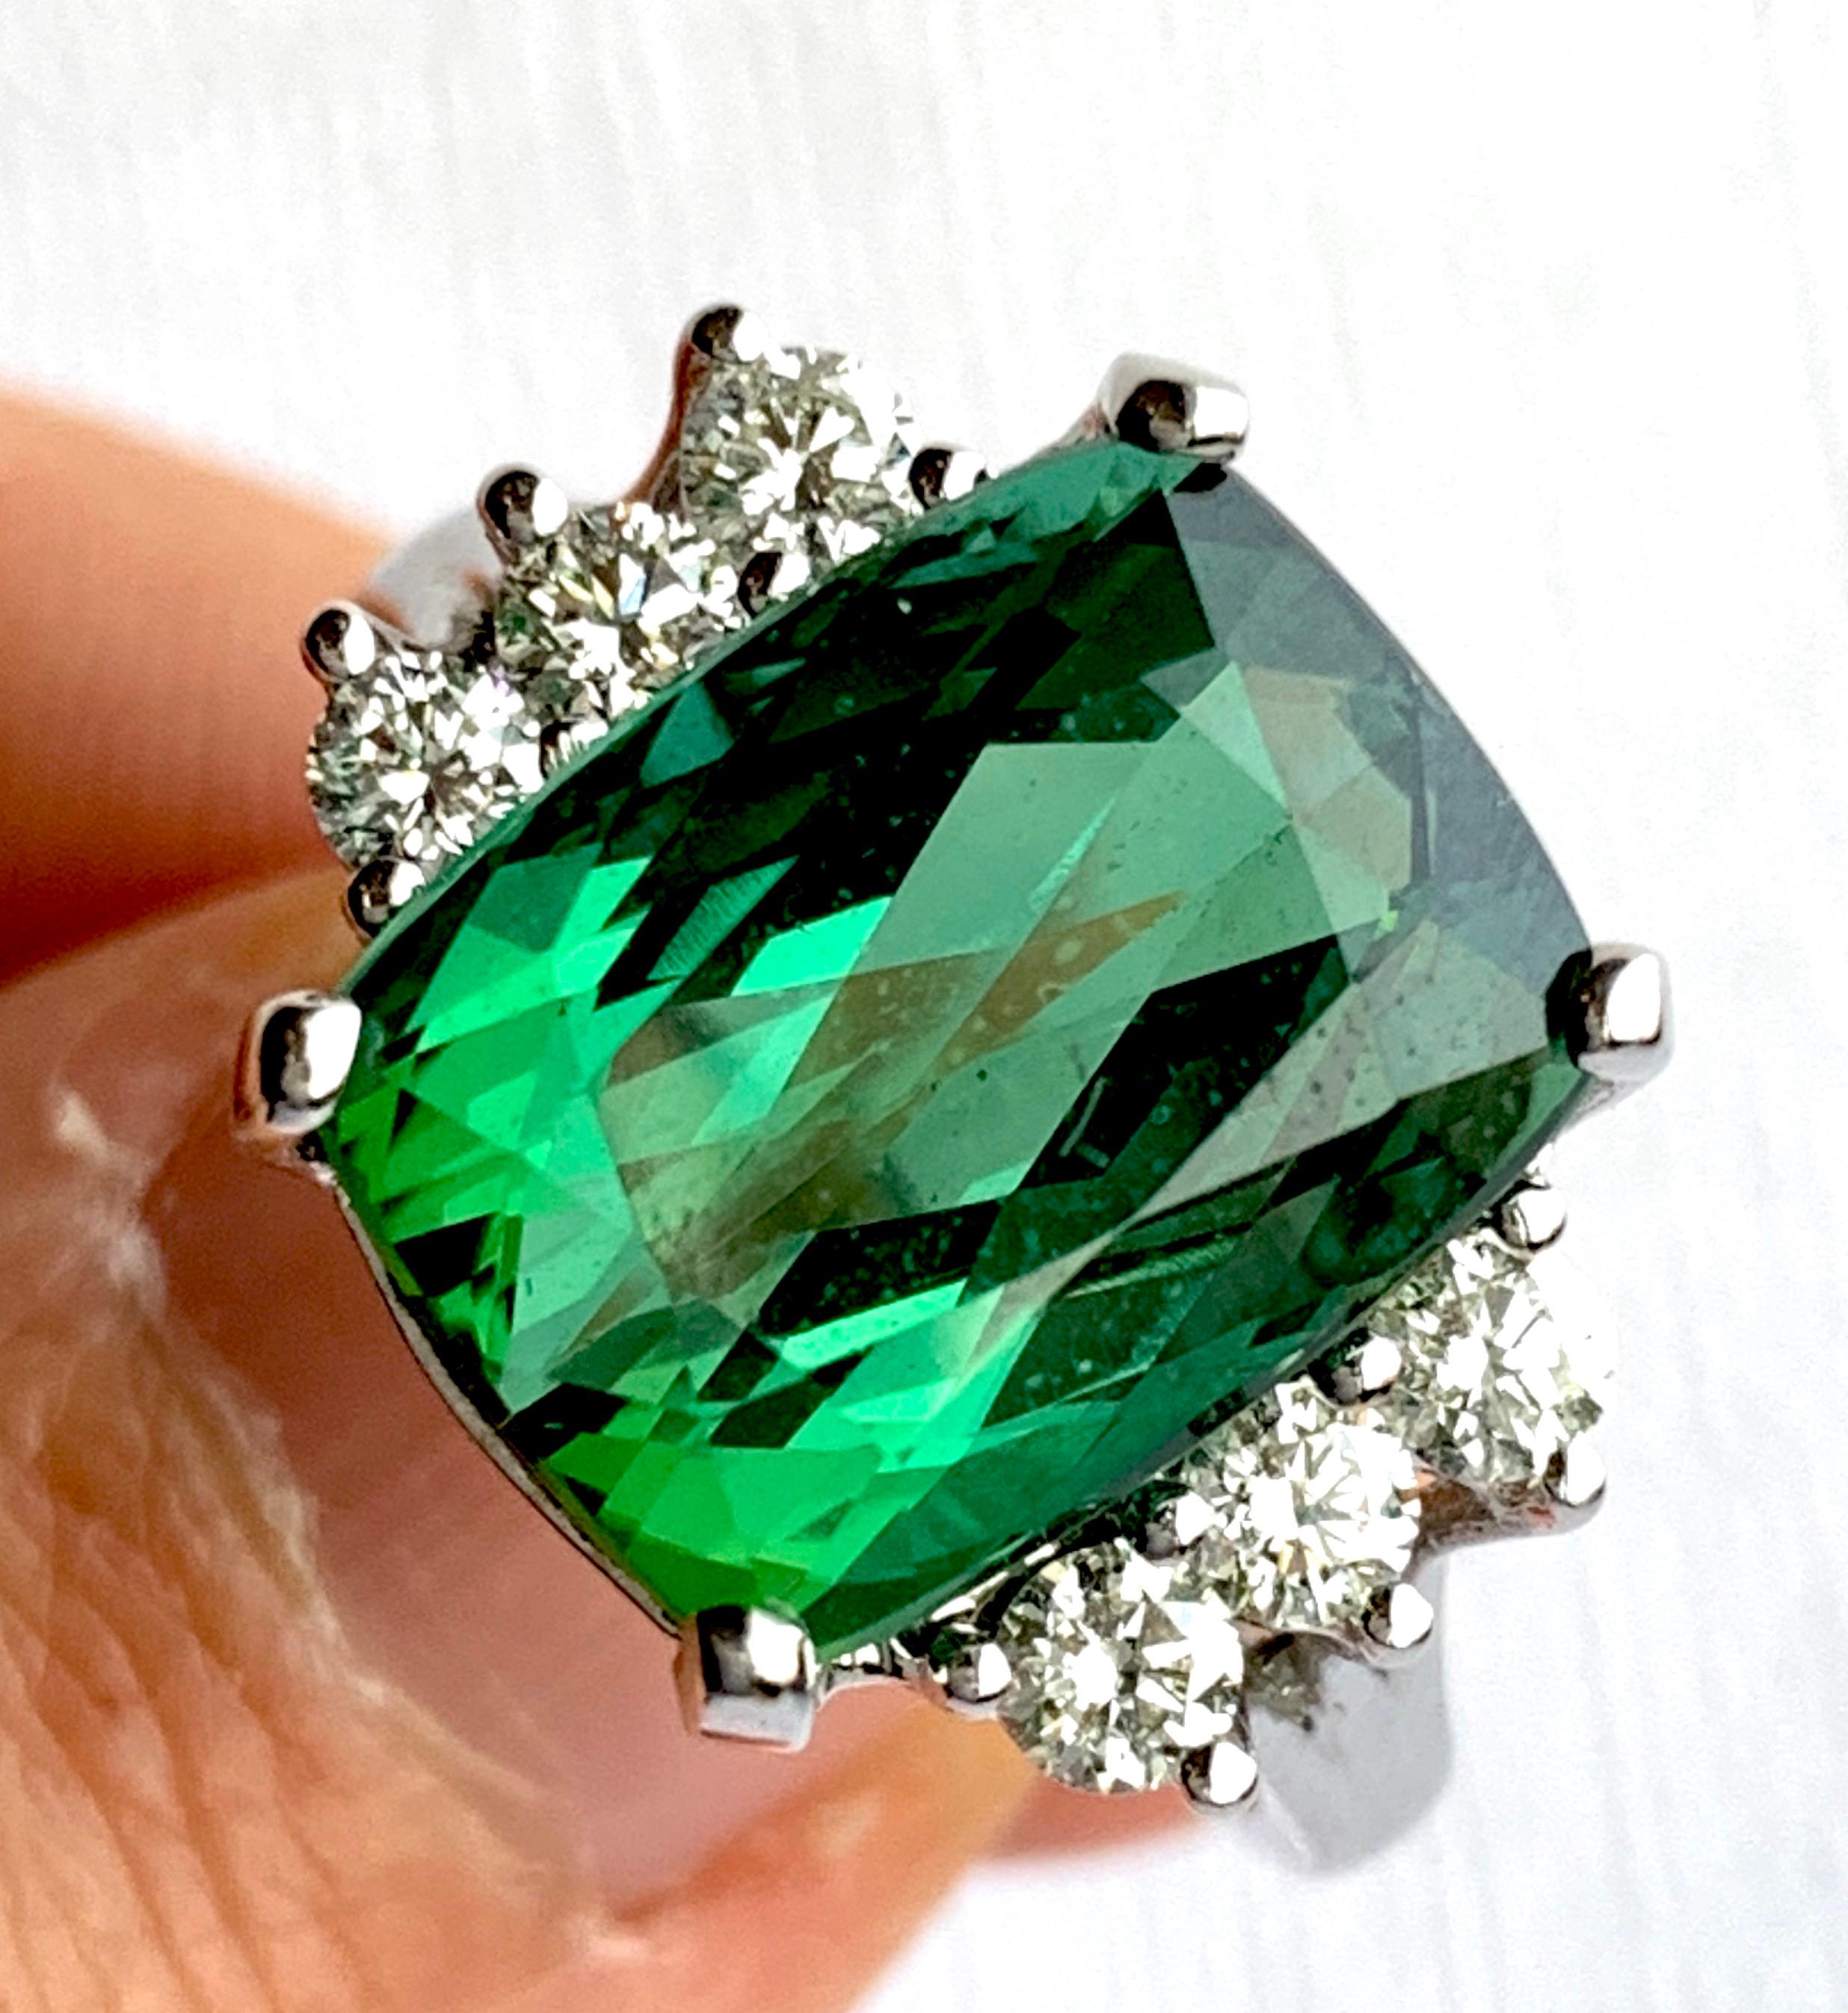 Material: 14k White Gold 
Center Stone Details: 7.31 Carat Cushion Green Tourmaline - Measuring 12.7 x 9.9 mm
Mounting Diamond Details: 6 Round White Diamonds Approximately 0.46 Carats - Clarity: SI / Color: H-I
Ring Size: Size 6.5. Alberto offers